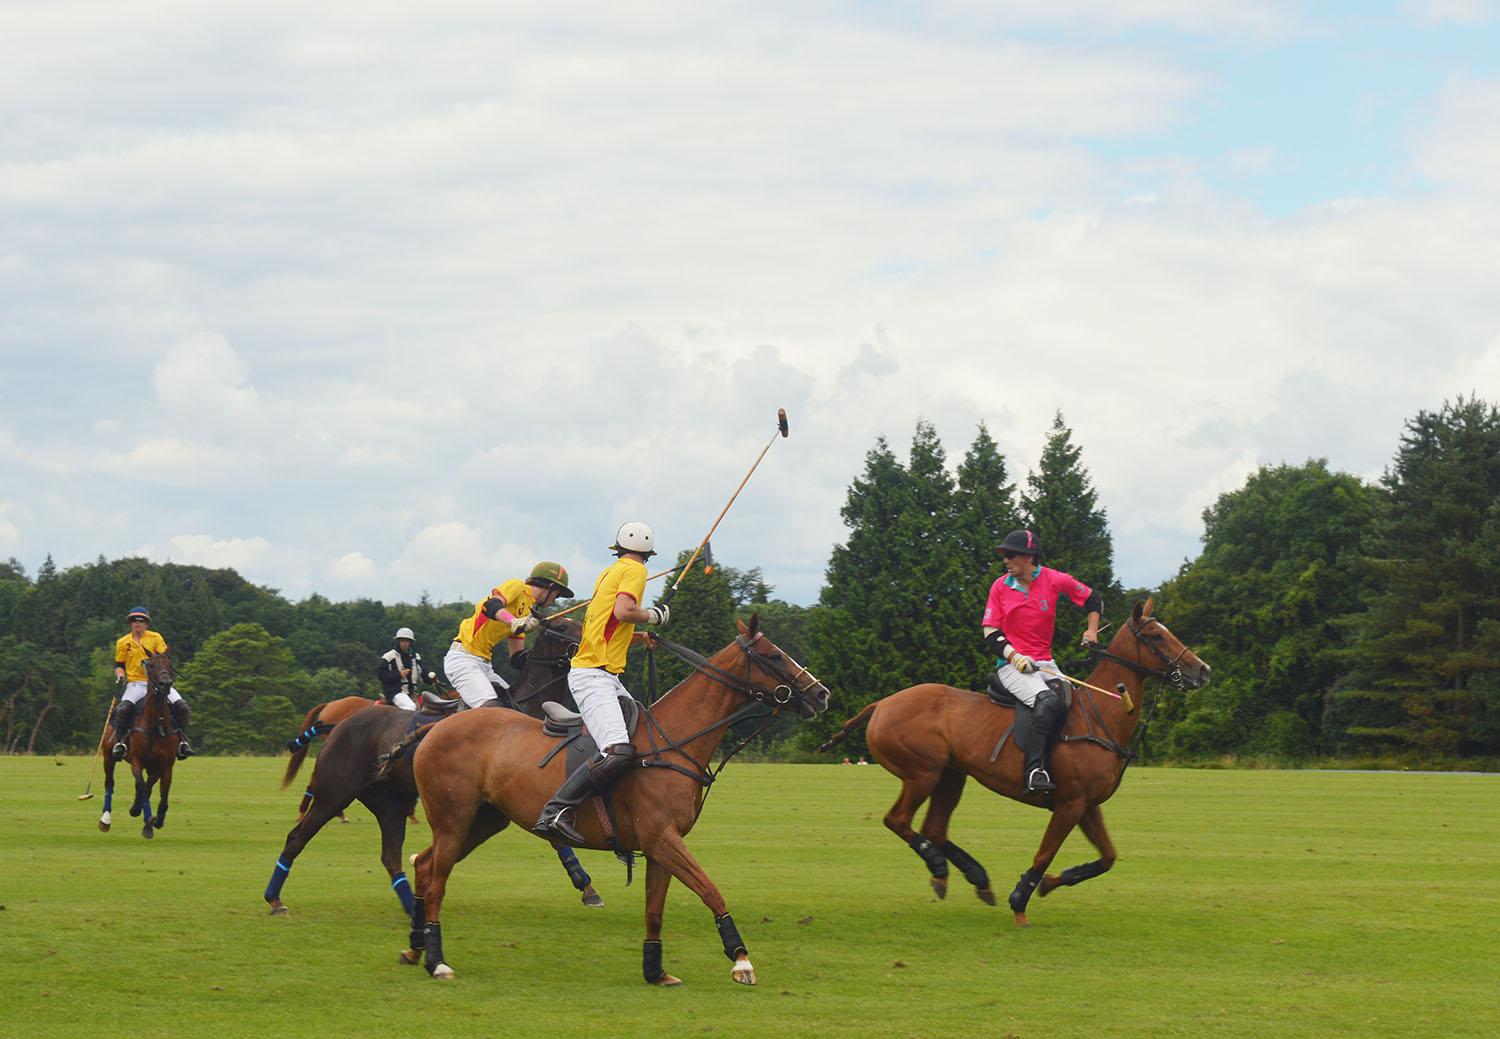 A spot of polo and a stay at the King’s Head Hotel, Cirencester